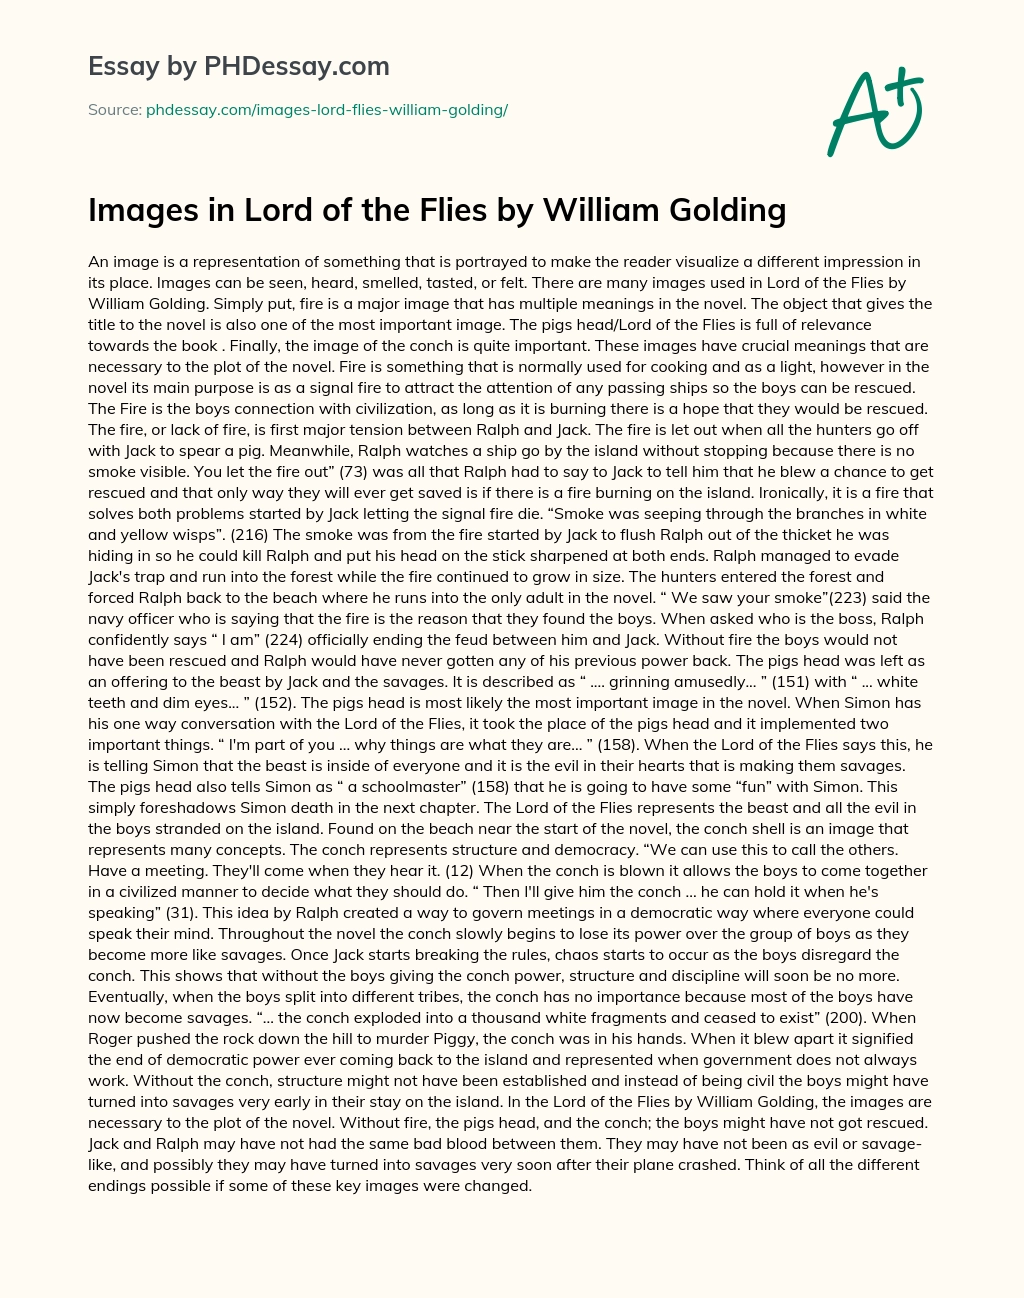 Images in Lord of the Flies by William Golding essay